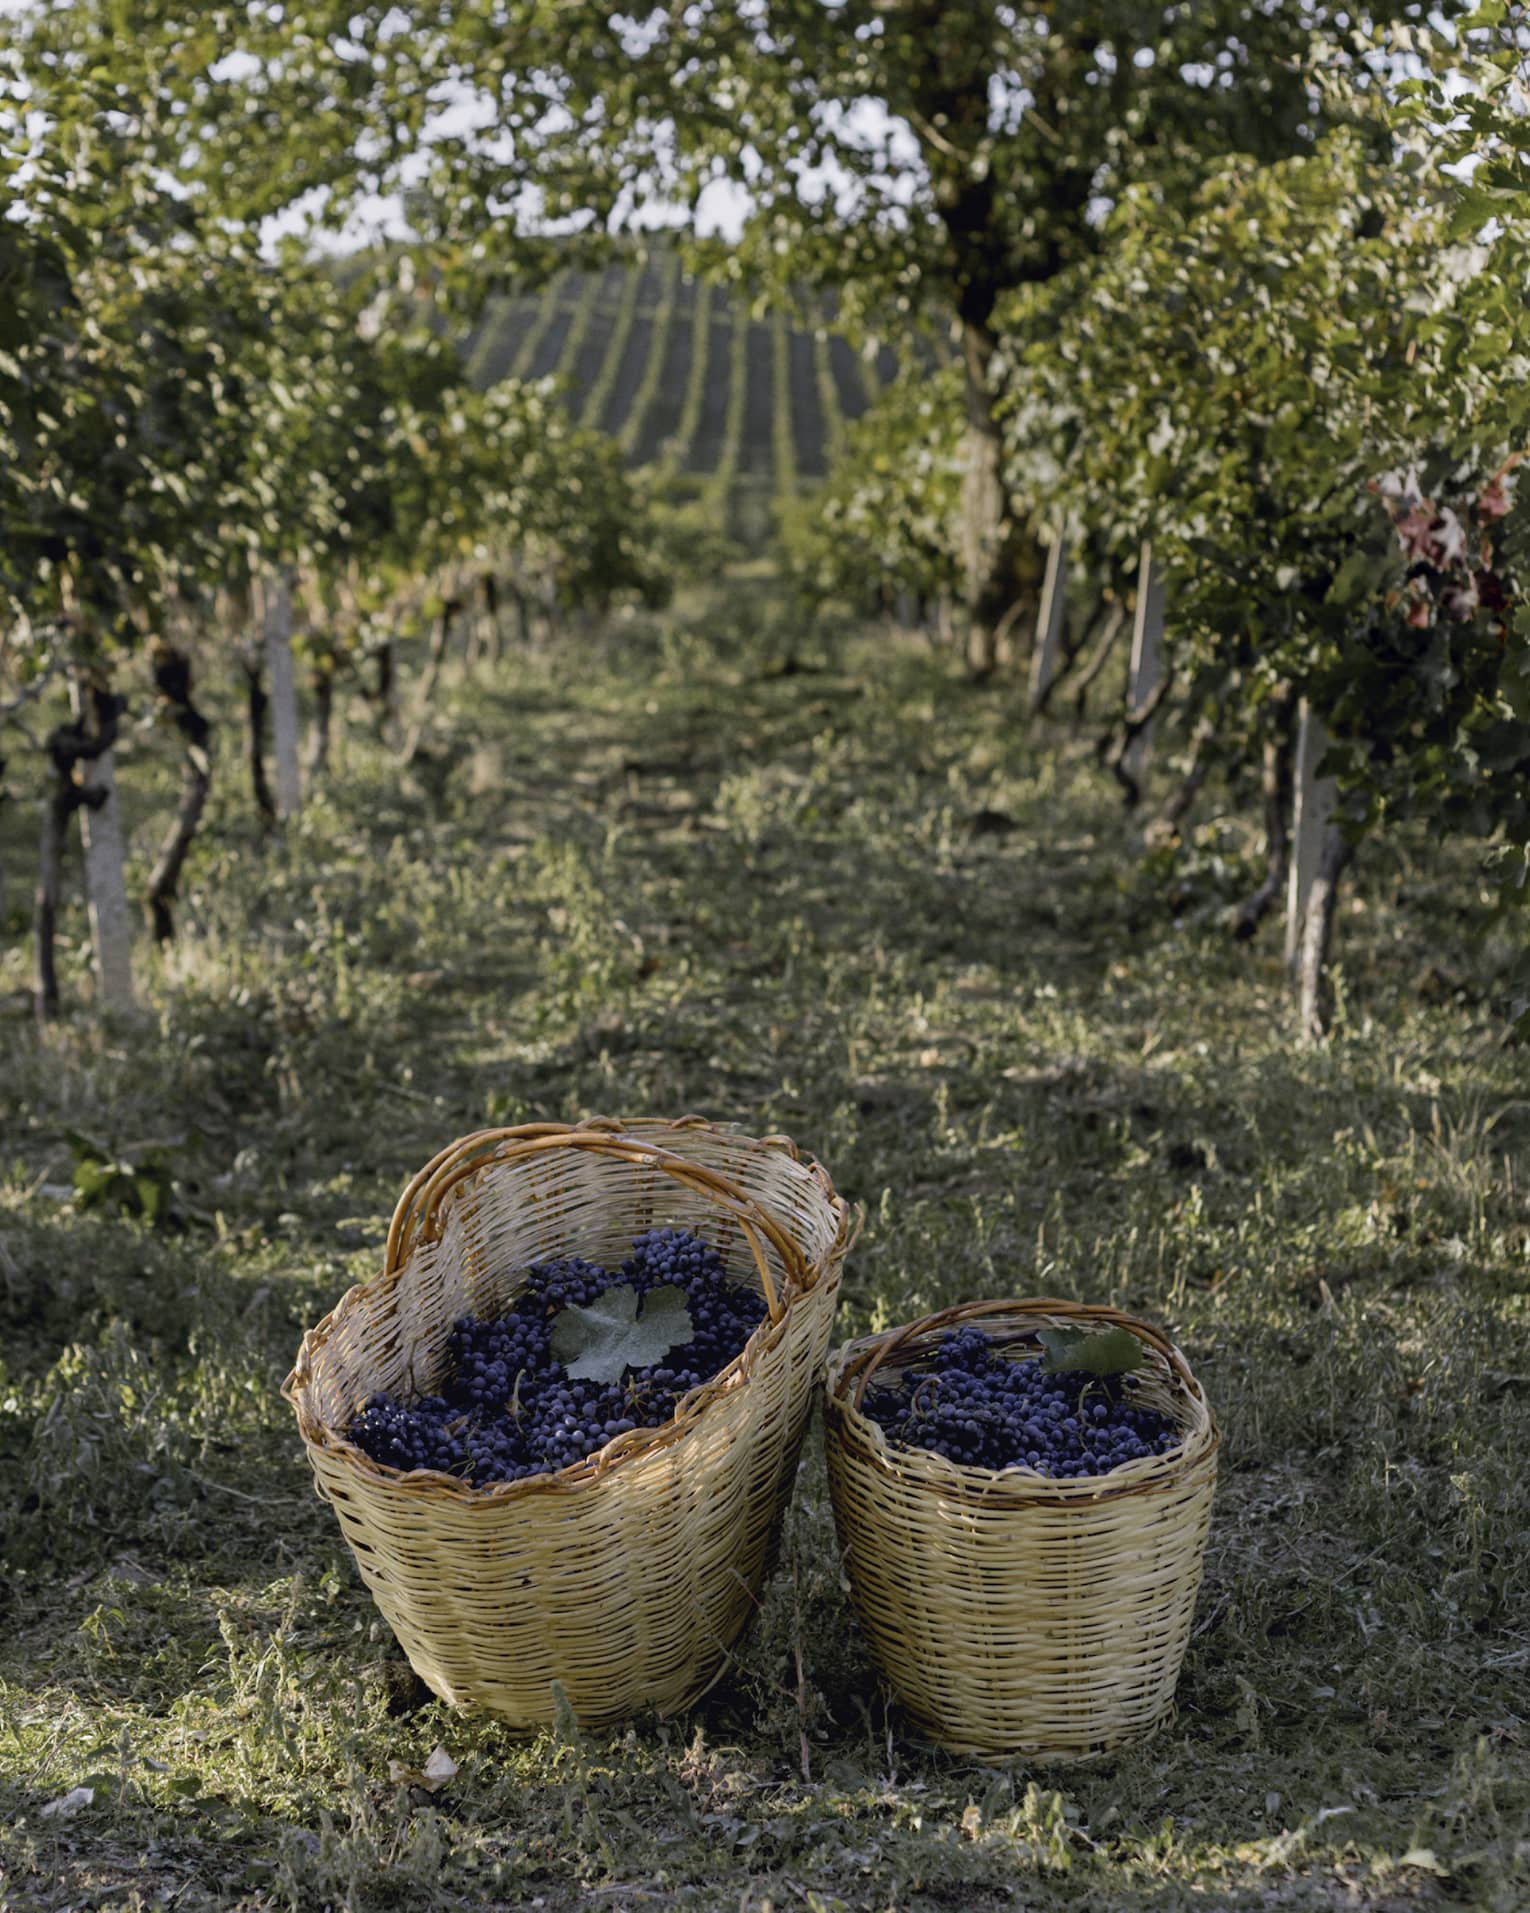 Two baskets of grapes on winery pathway